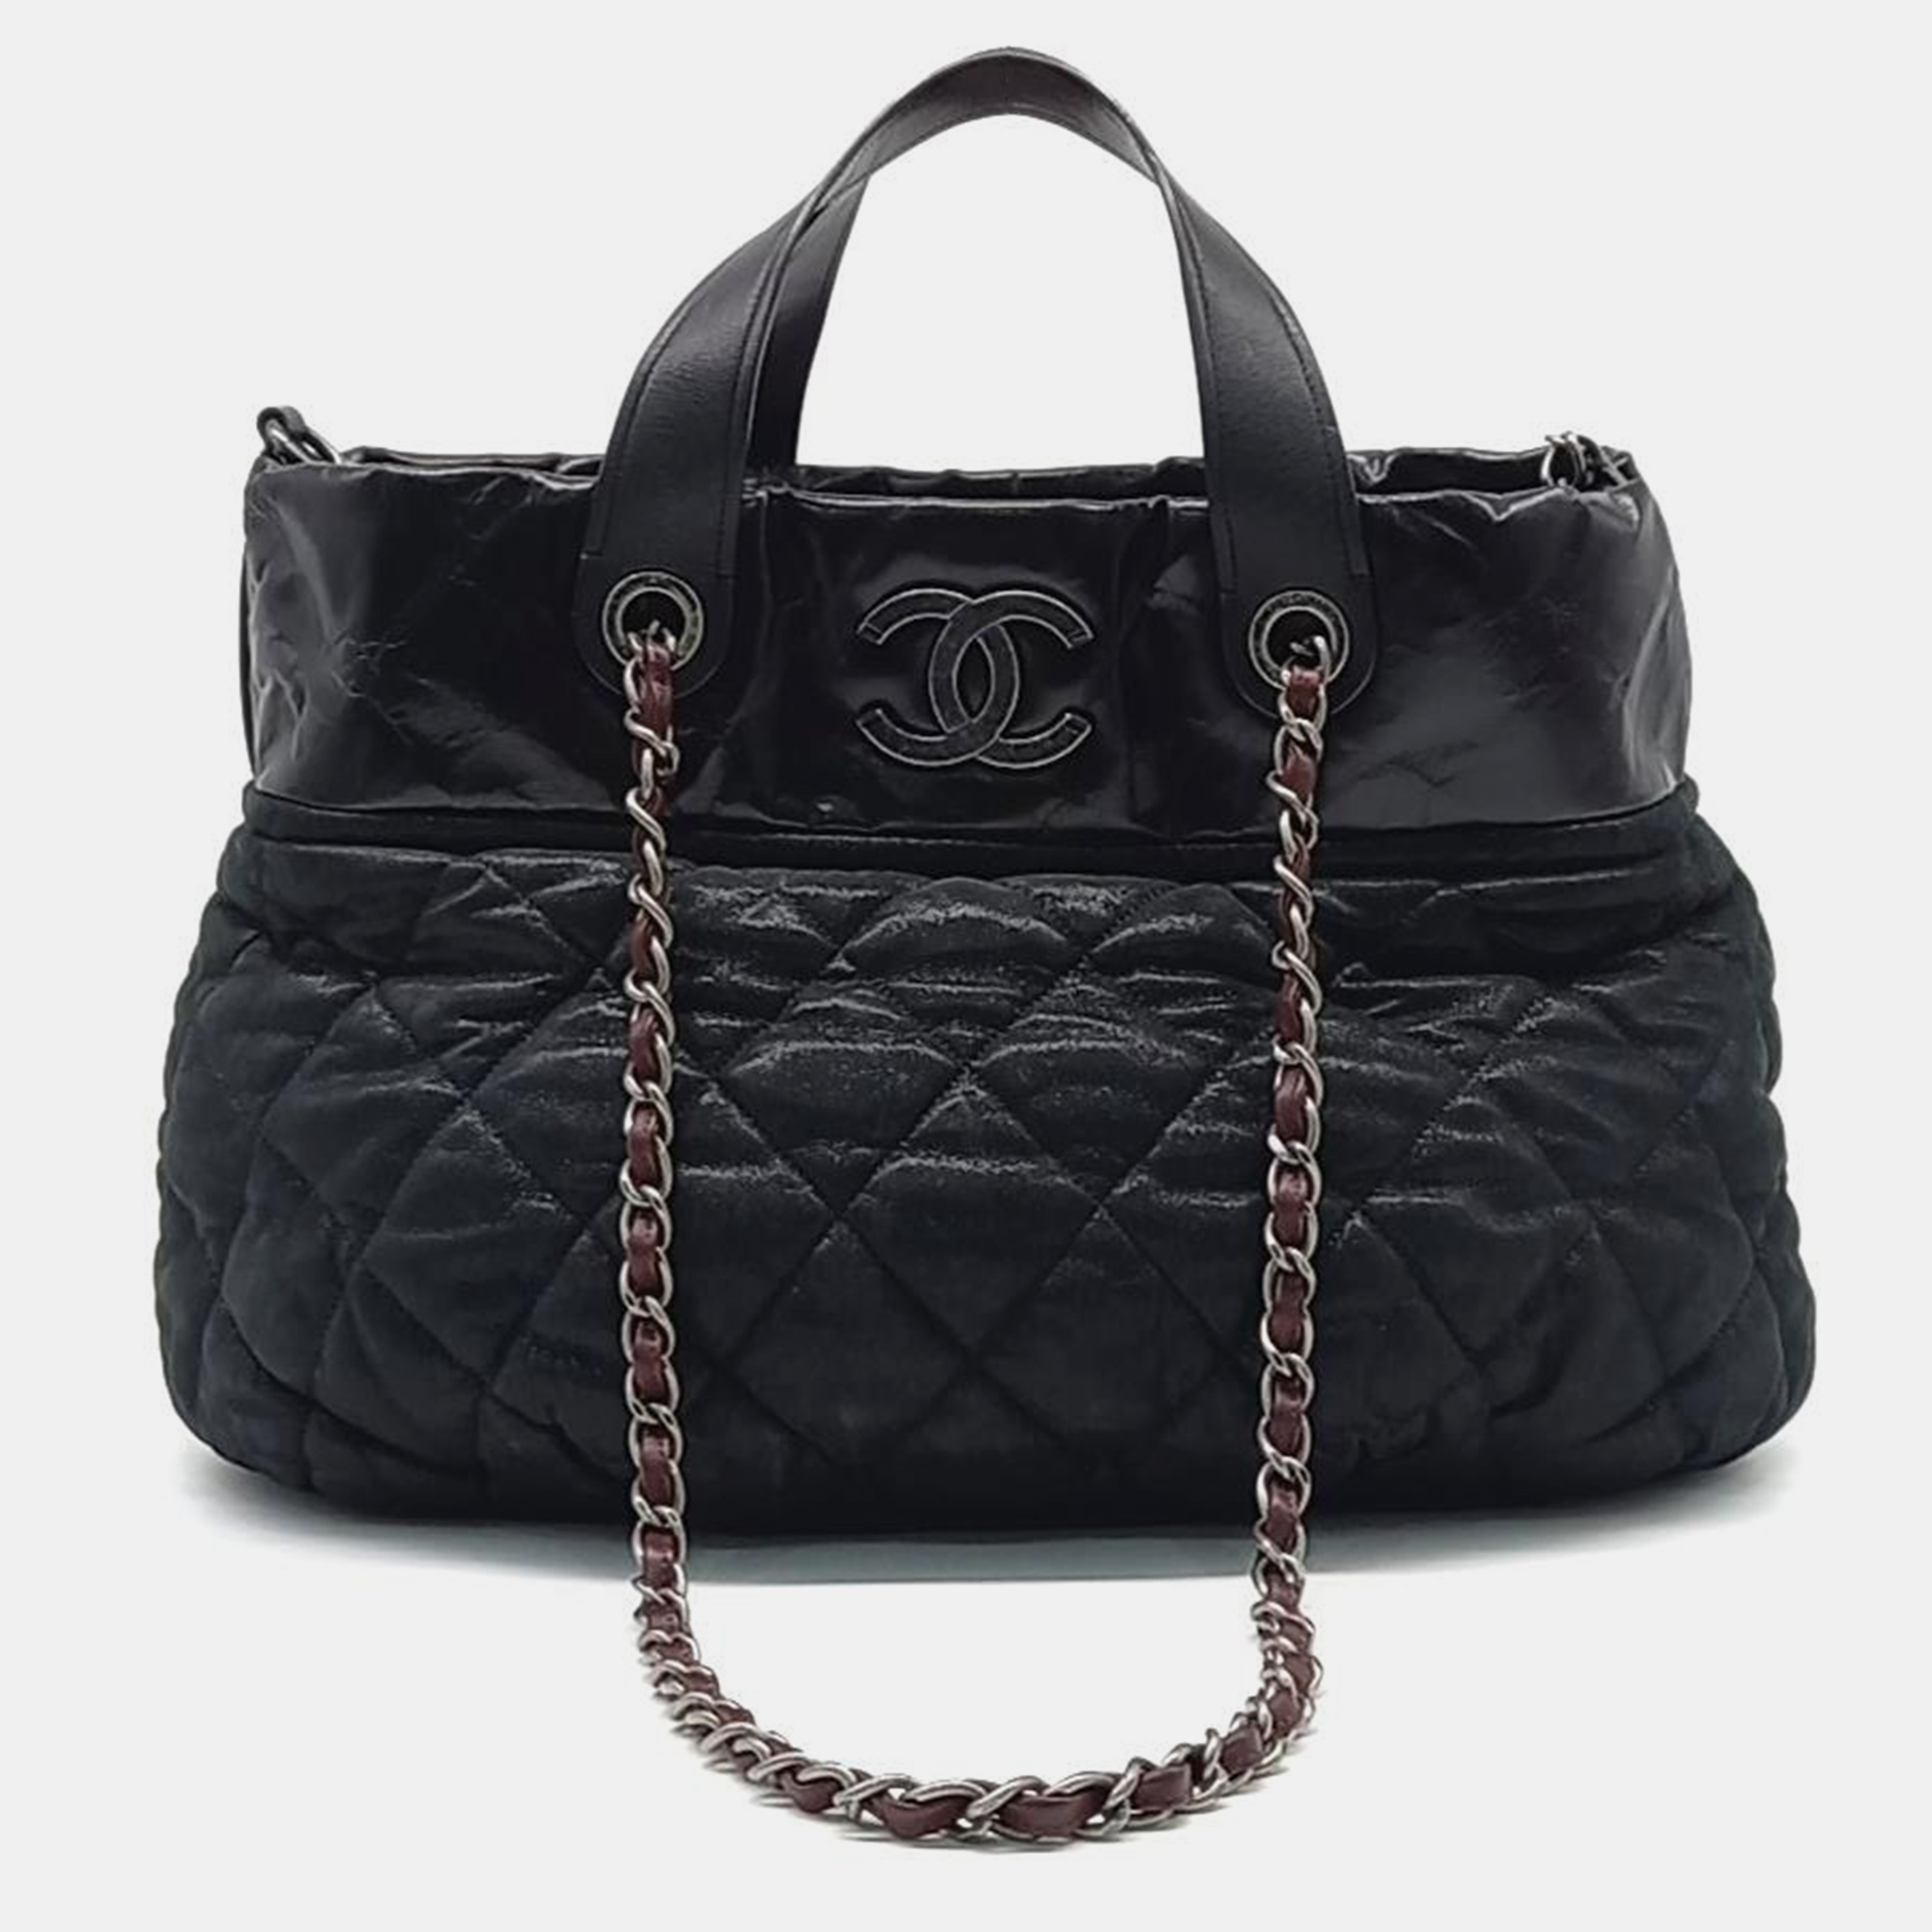 

Chanel In the Mix Tote and Shoulder Bag, Black